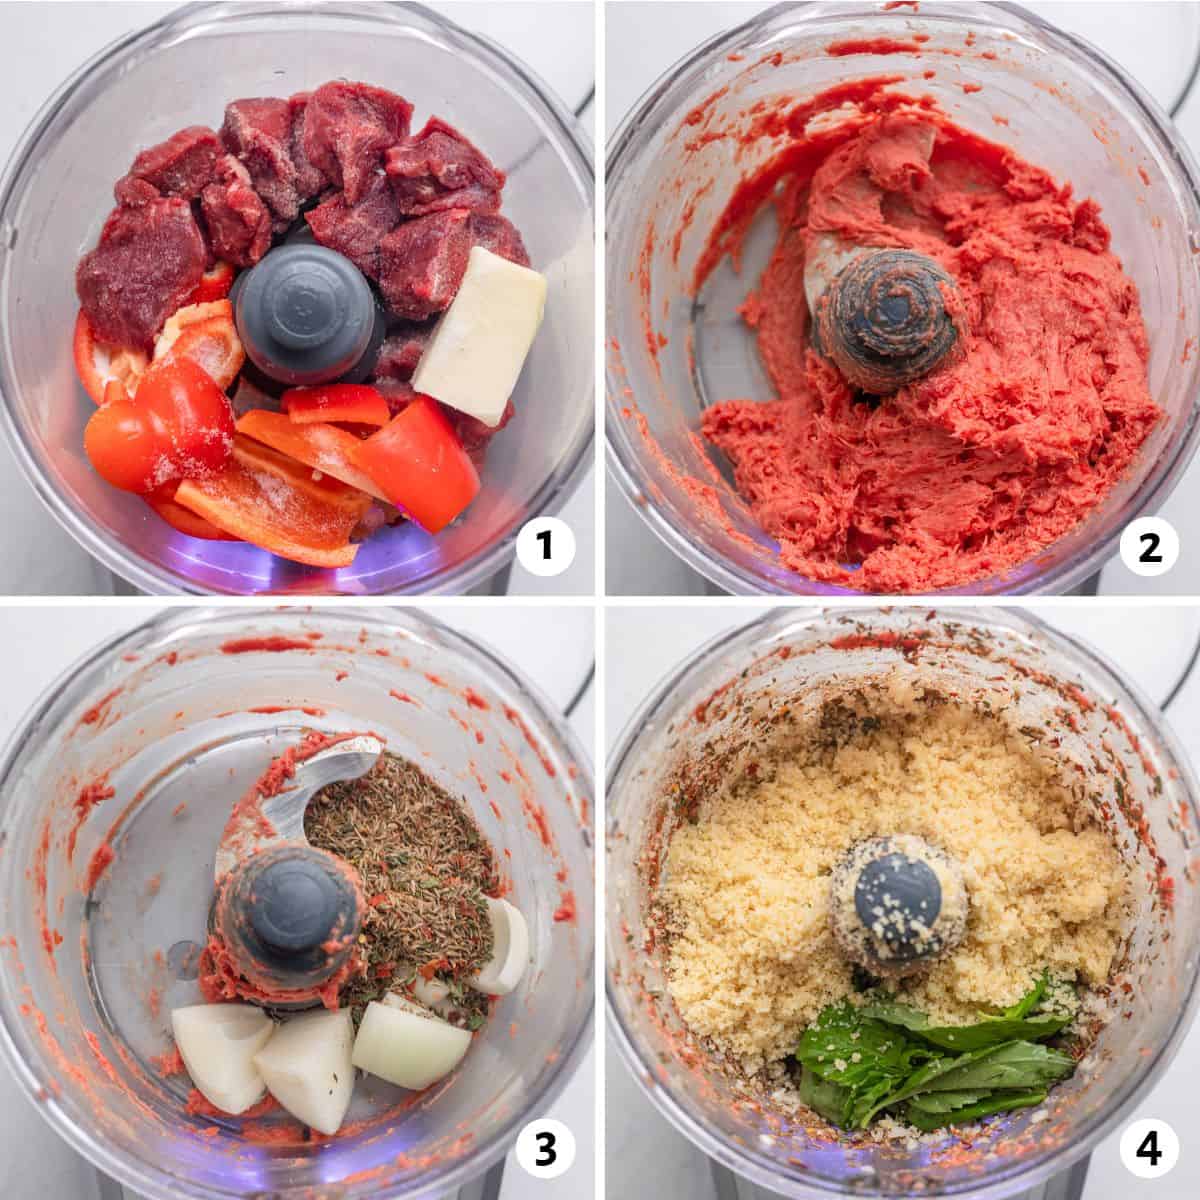 4 image collage of recipe being blended in a food processor: 1- chunks of beef, red pepper, and salt before blended, 2- after blended, 3- meat mixture removed and onion and spice added, 4- bulgur and herbs added.